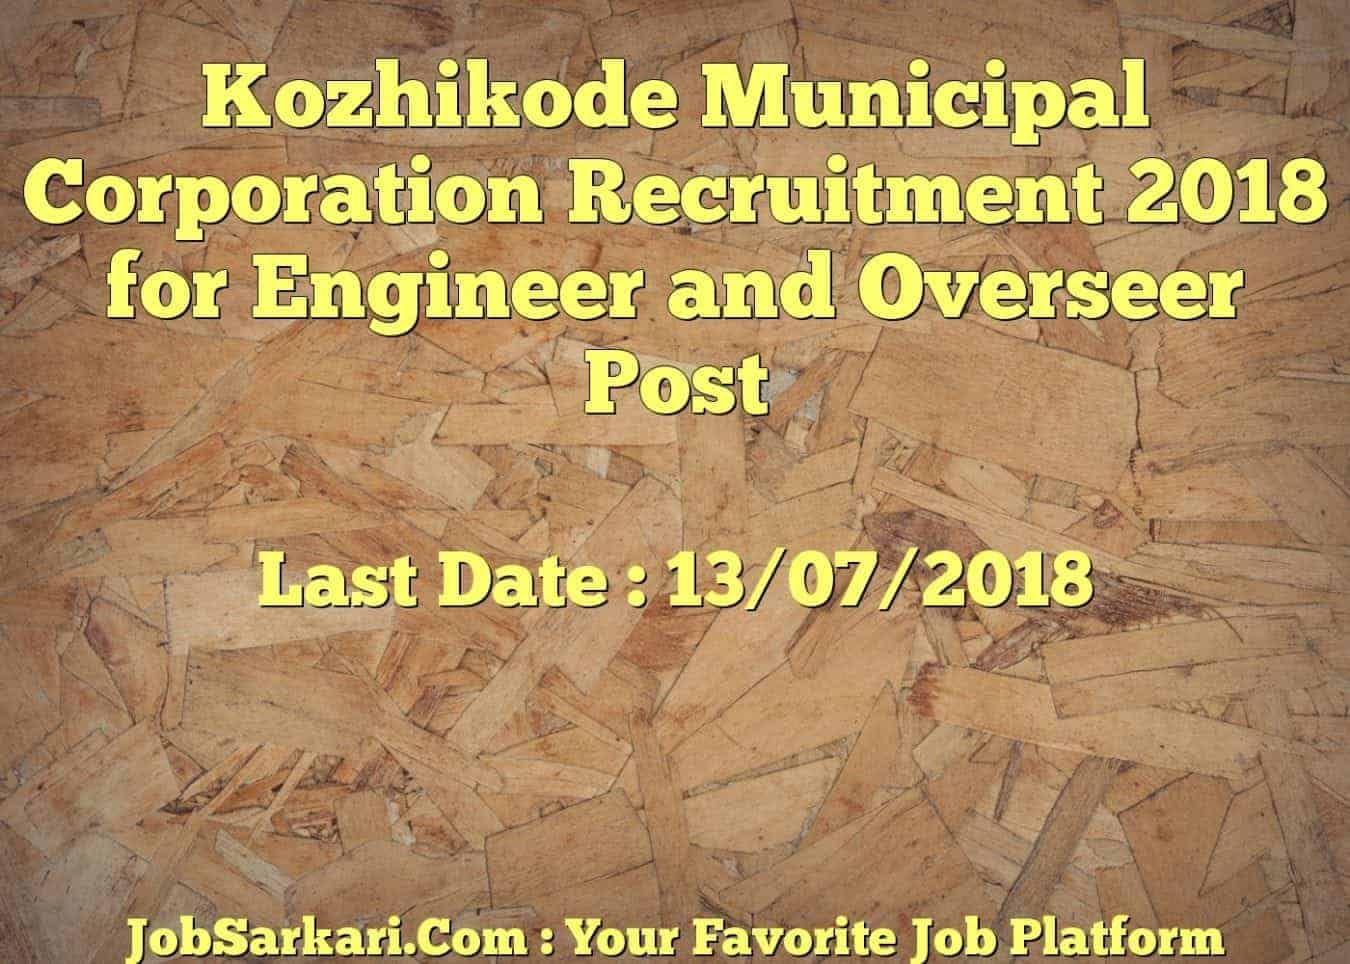 Kozhikode Municipal Corporation Recruitment 2018 for Engineer and Overseer Post